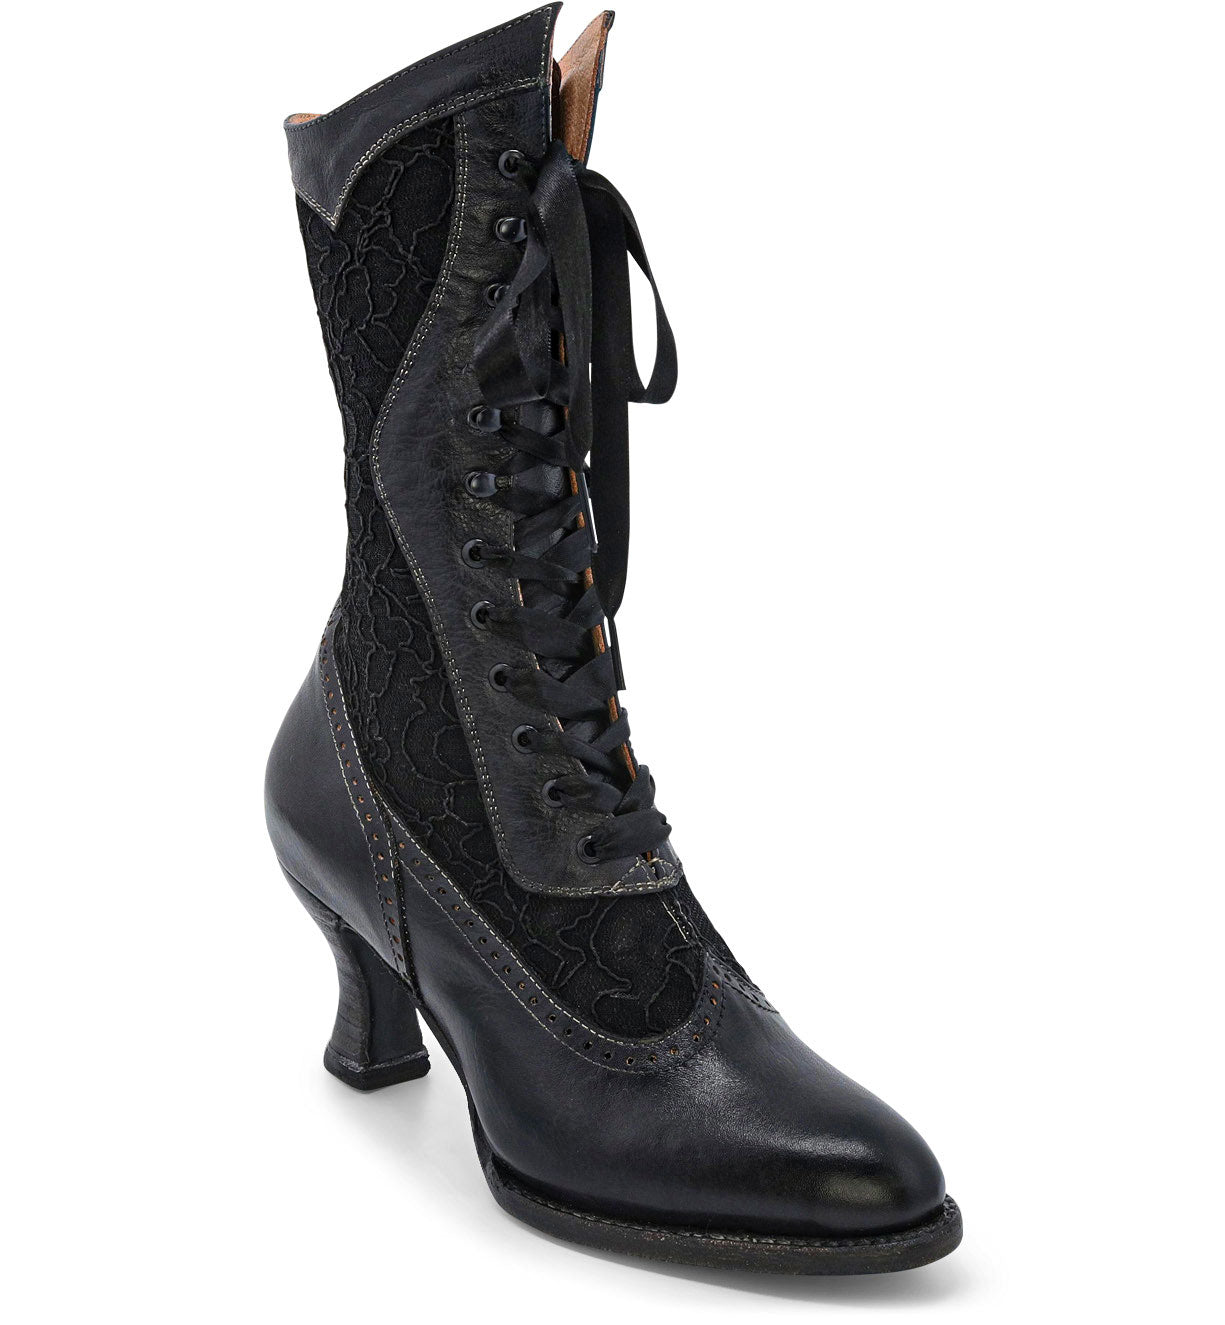 A hand crafted women's black lace up Abigale boot from Oak Tree Farms.